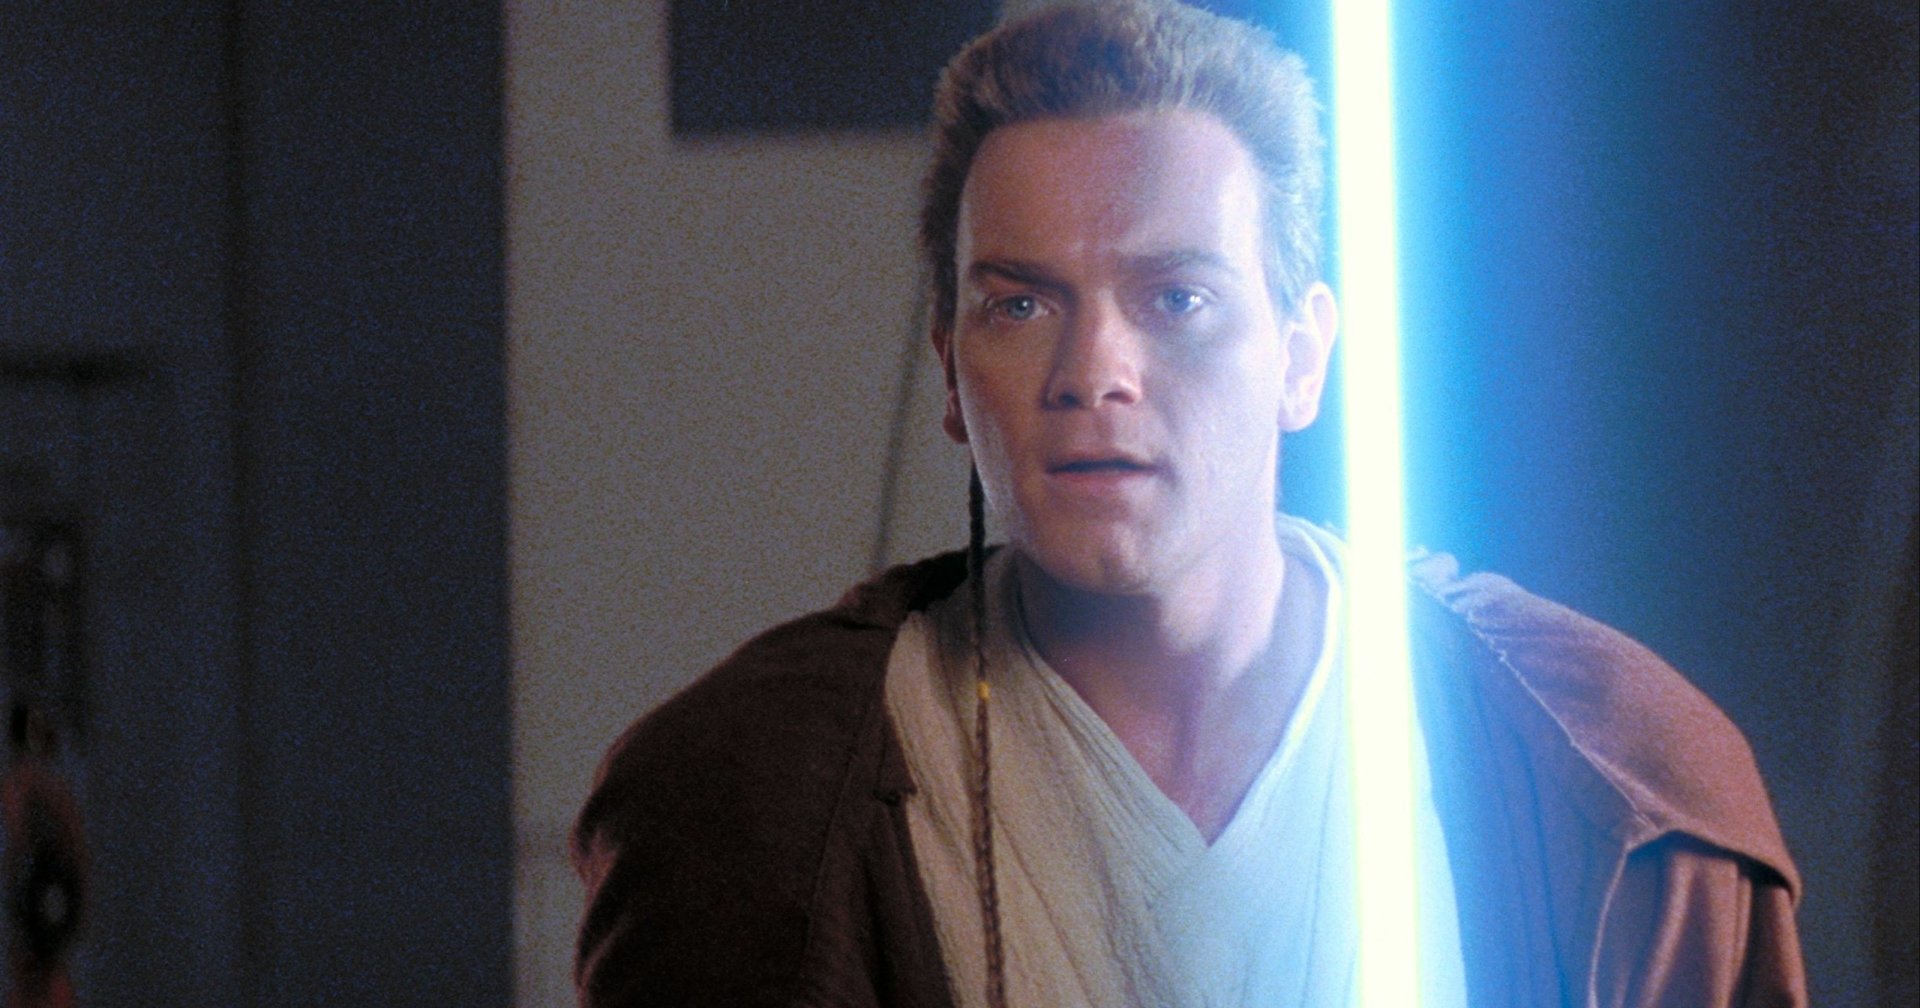 instal the new for android Star Wars Ep. I: The Phantom Menace